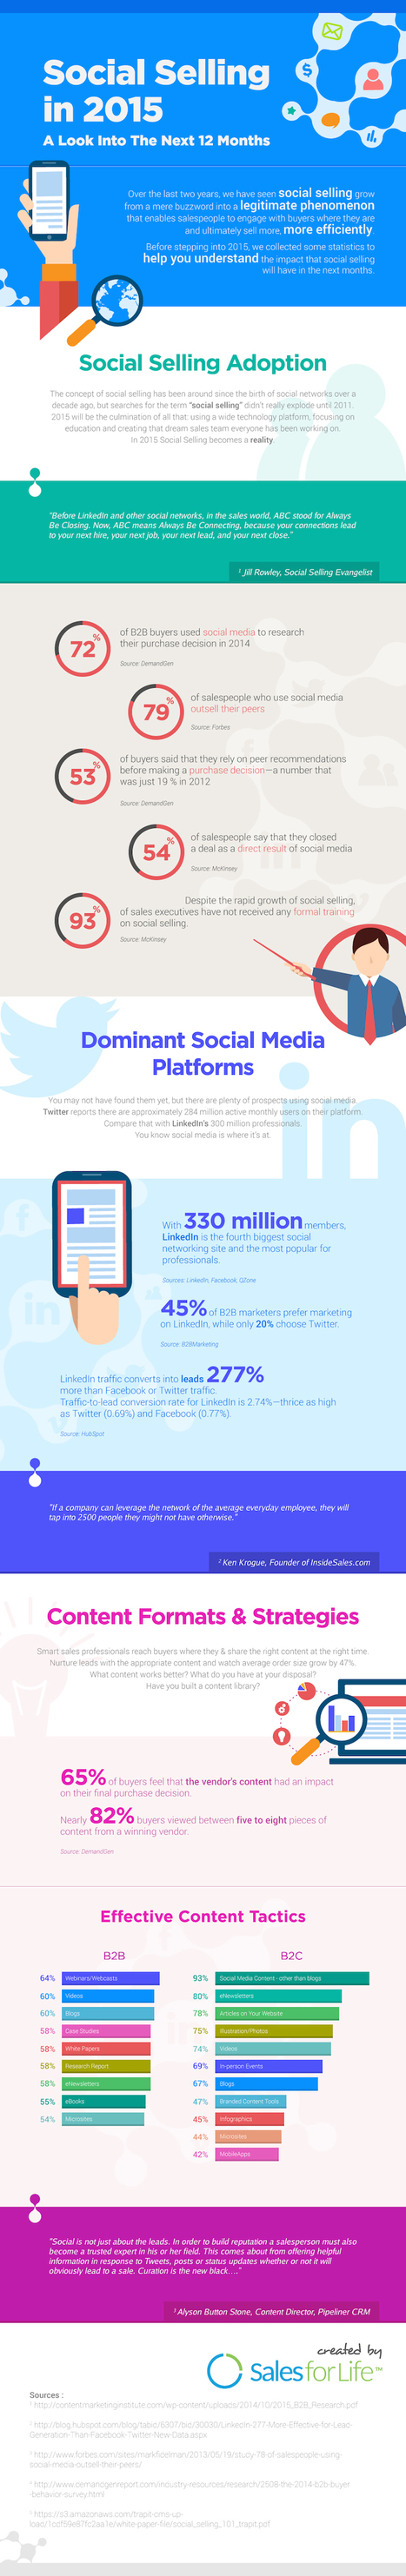 Social Selling in 2015 - A Look into the Next 12 Months [Infographic] - B2B Infographics | The MarTech Digest | Scoop.it